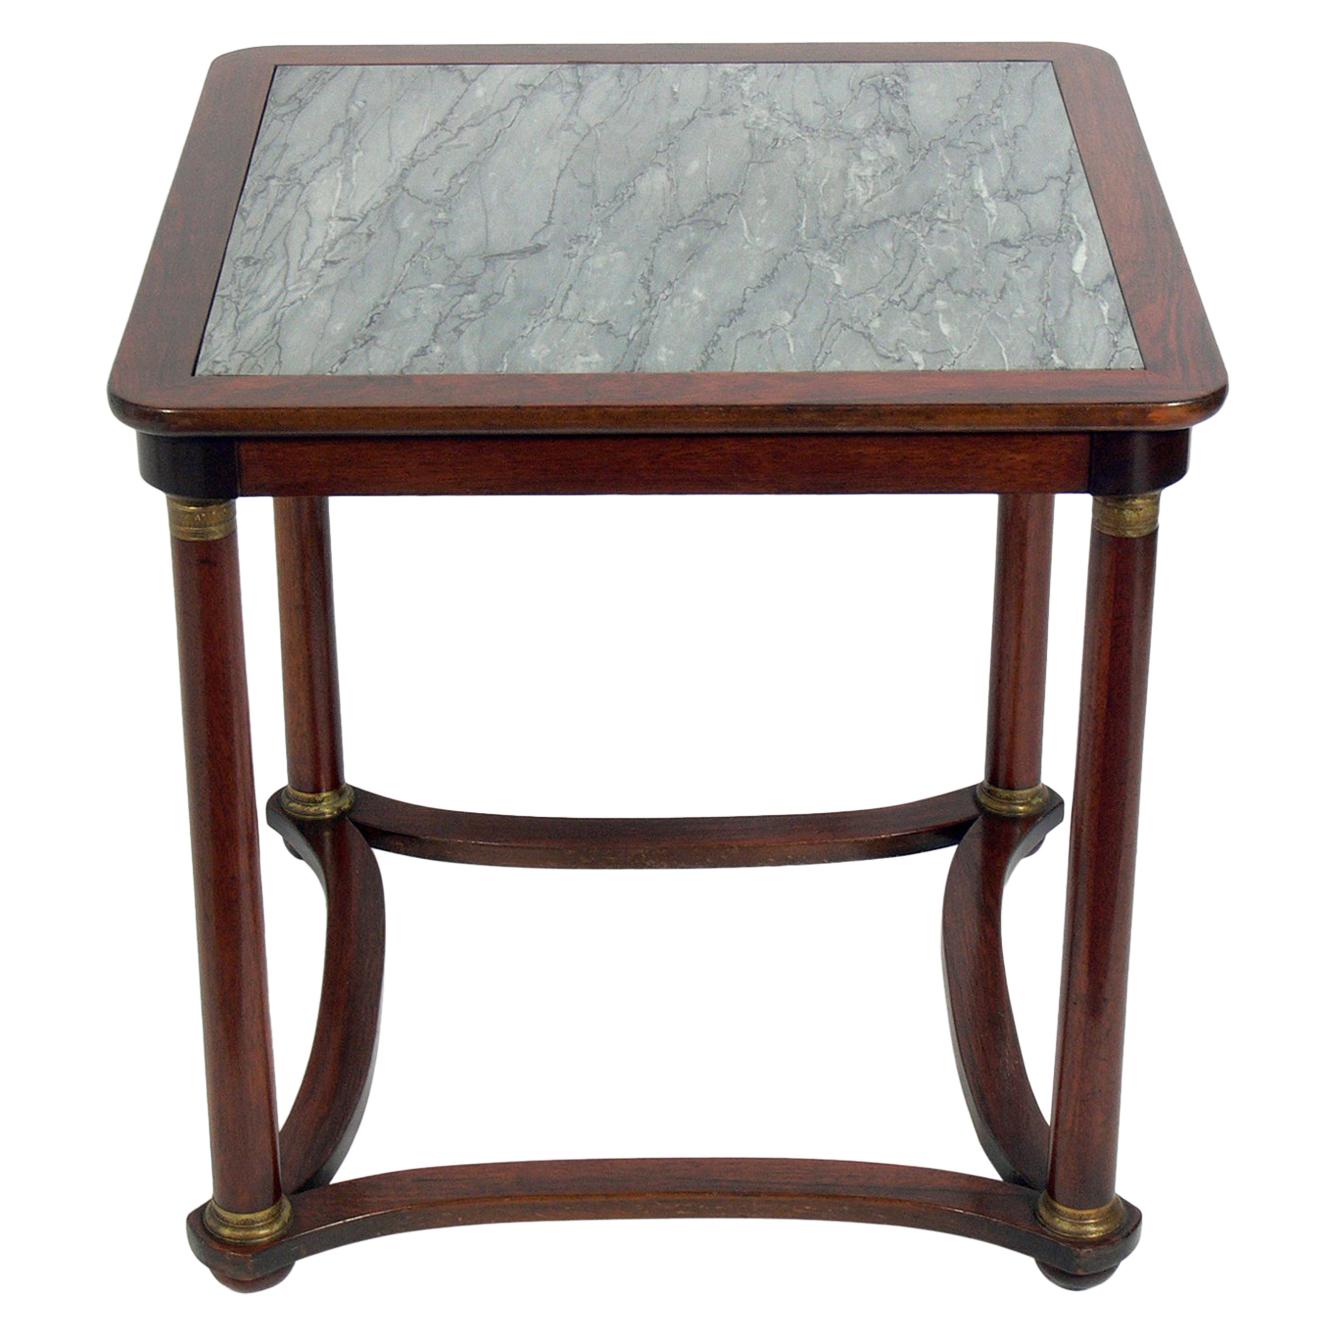 Neoclassical Rosewood and Marble Table